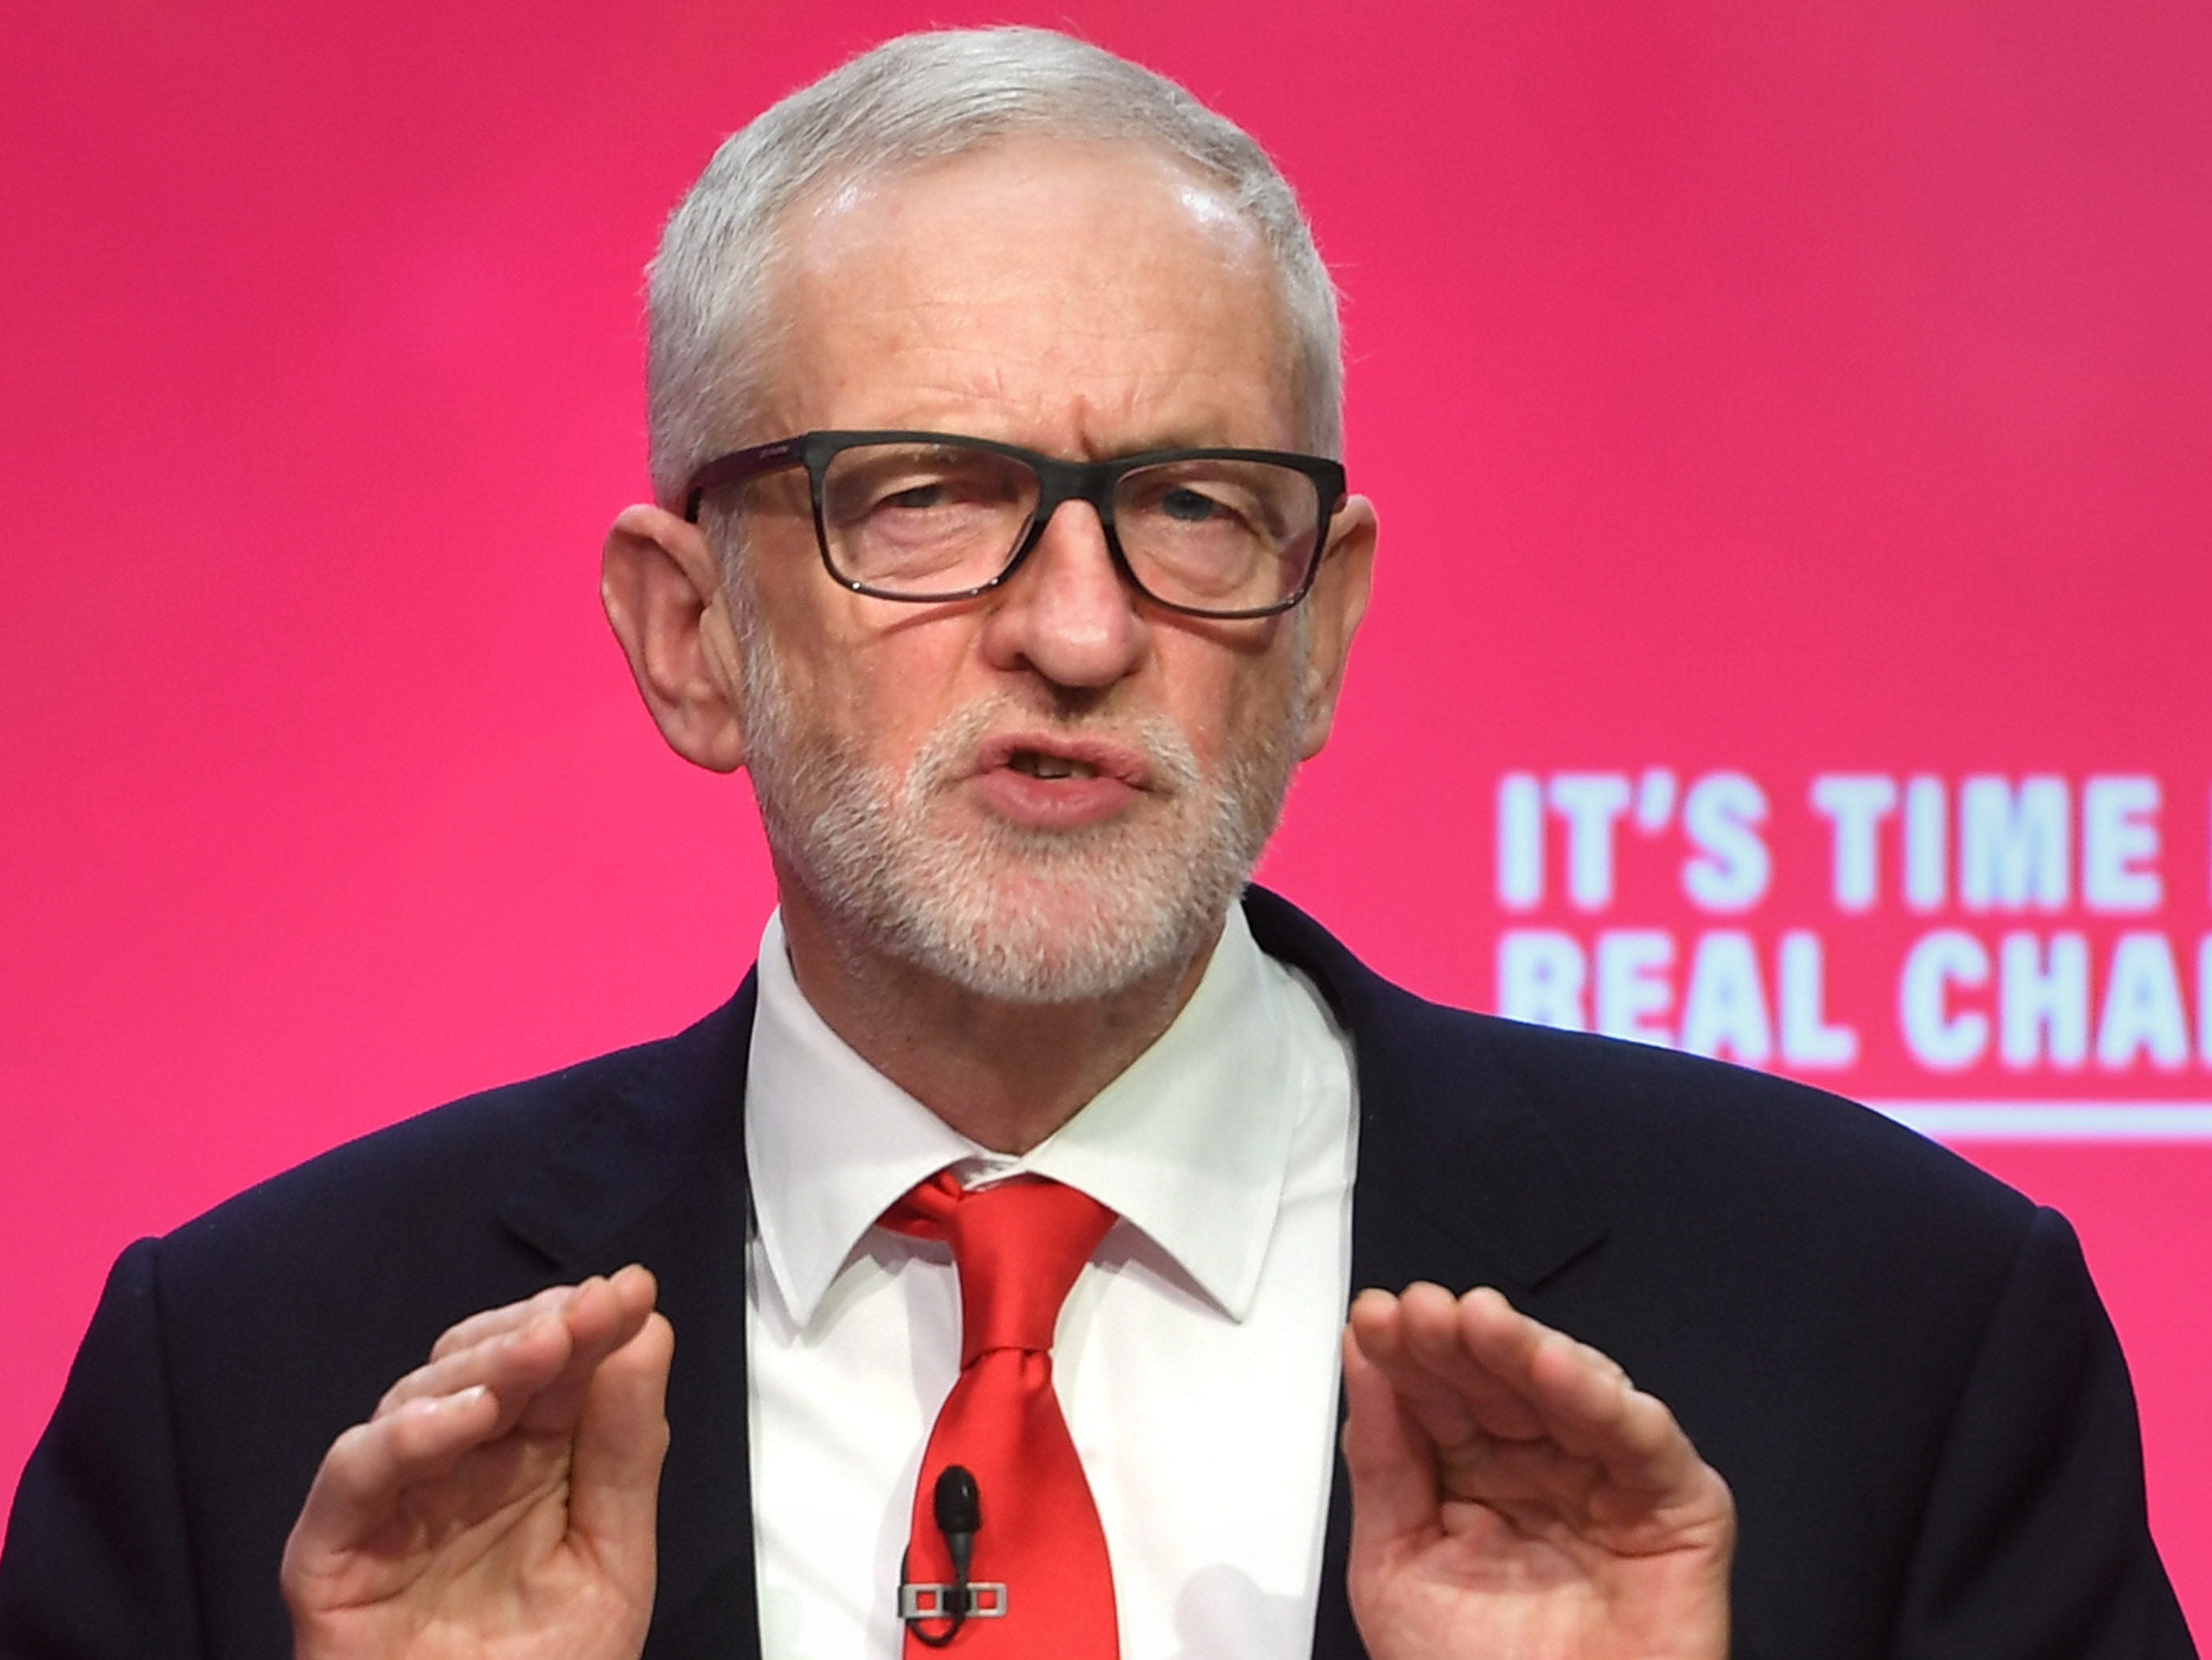 Labour pledges another 'fake news' inquiry and action against Duopoly in 2019 manifesto